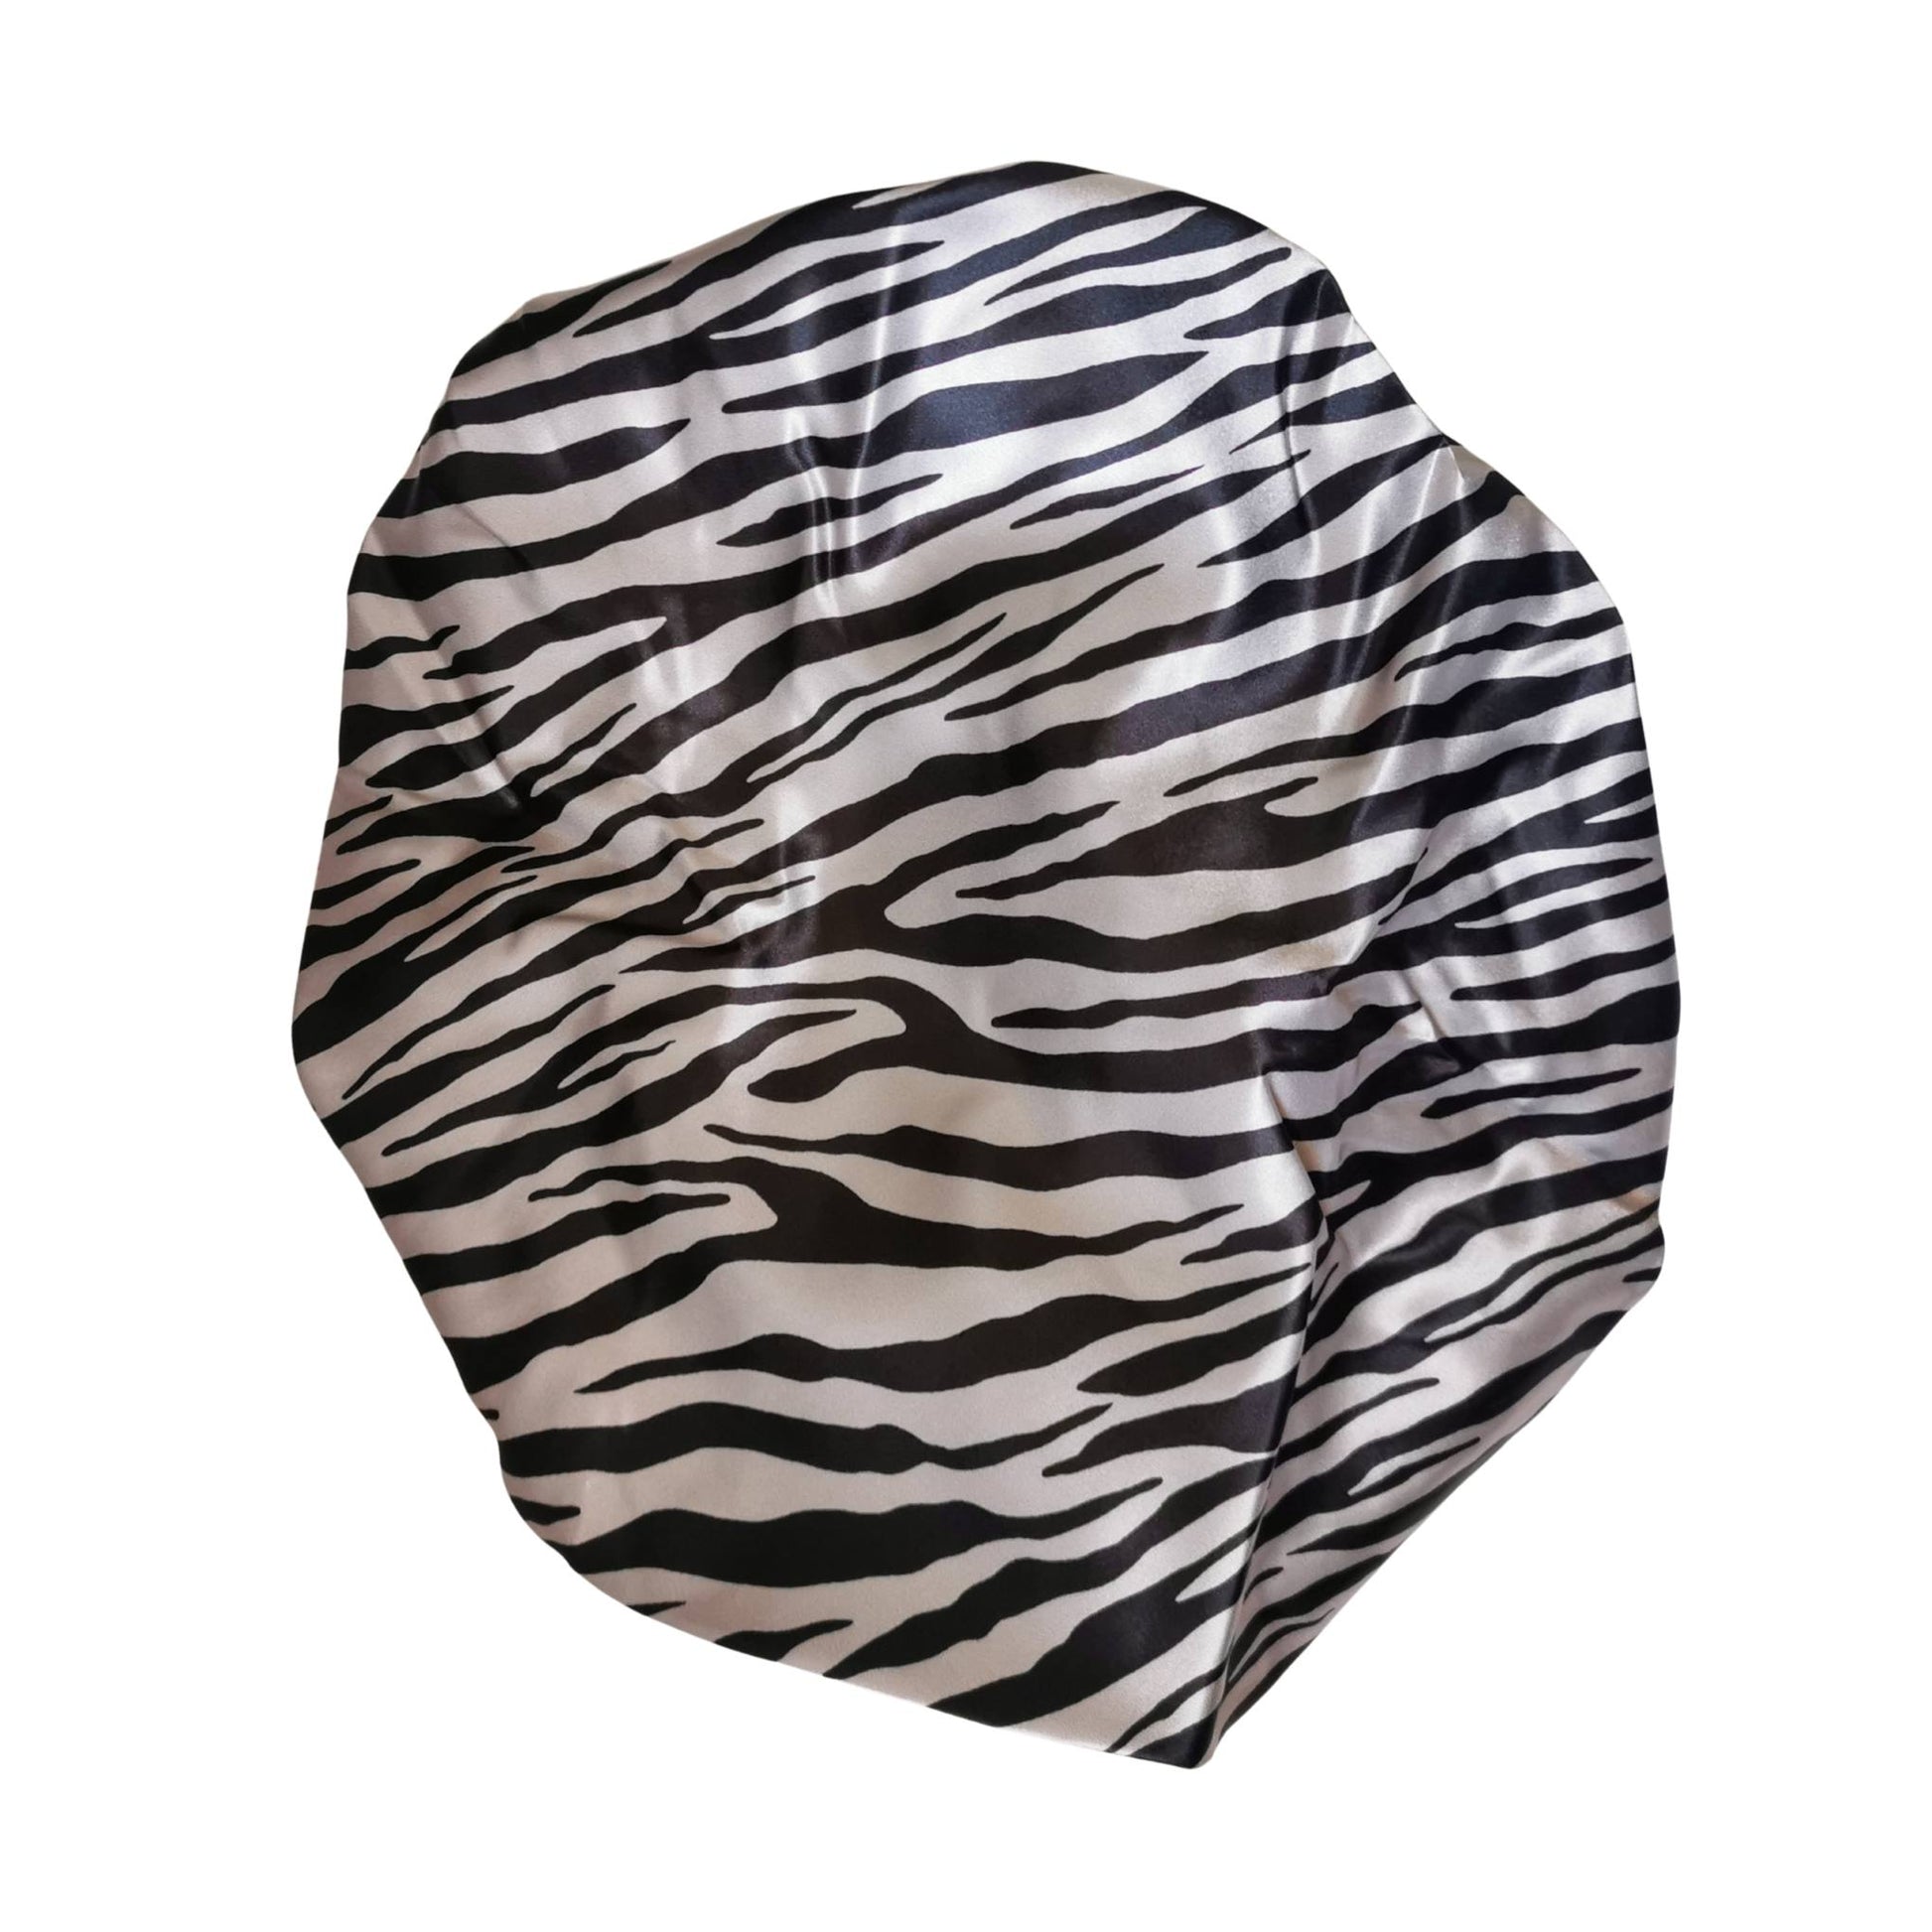 zebra print satin bonnet with frill finish and black lining - top print view